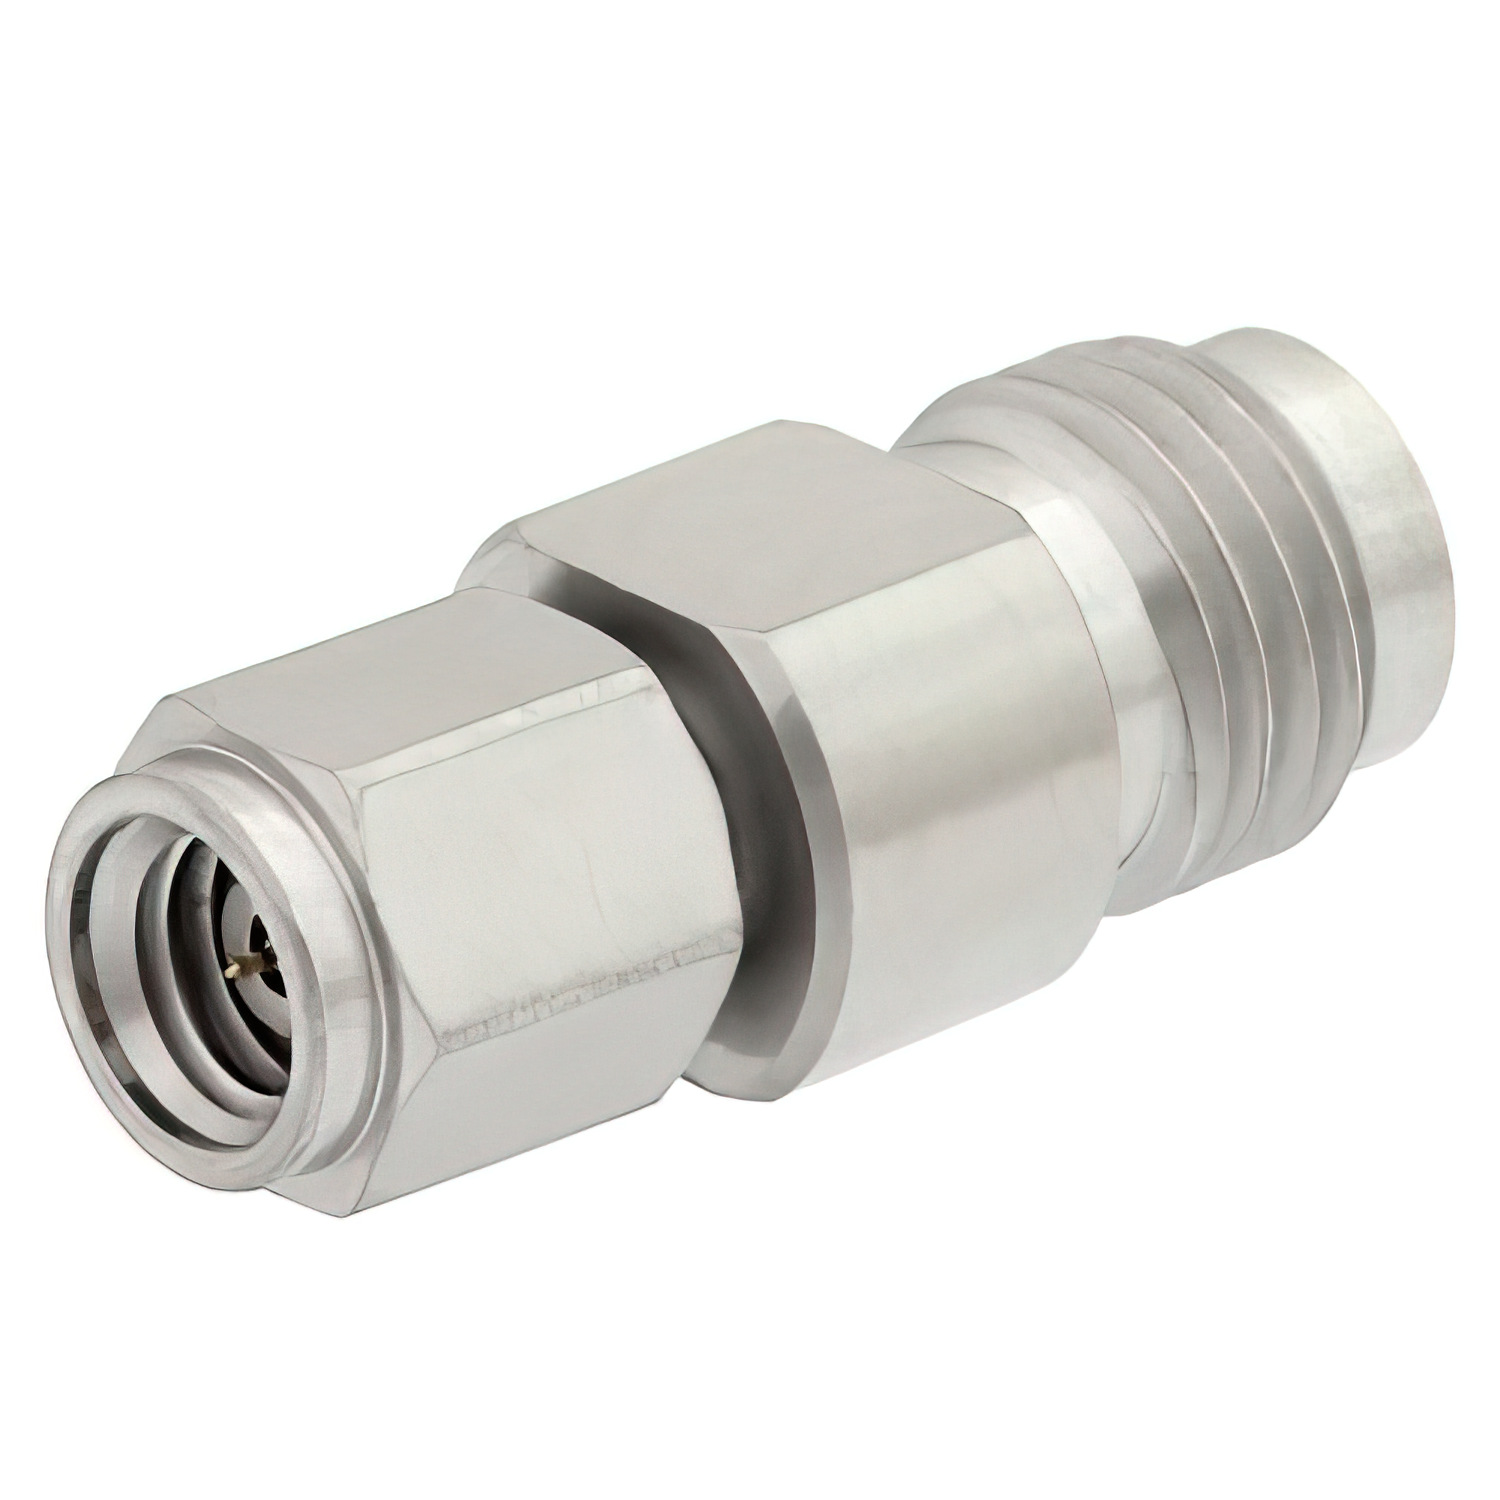 1.0mm male to 1.85mm female adapter1